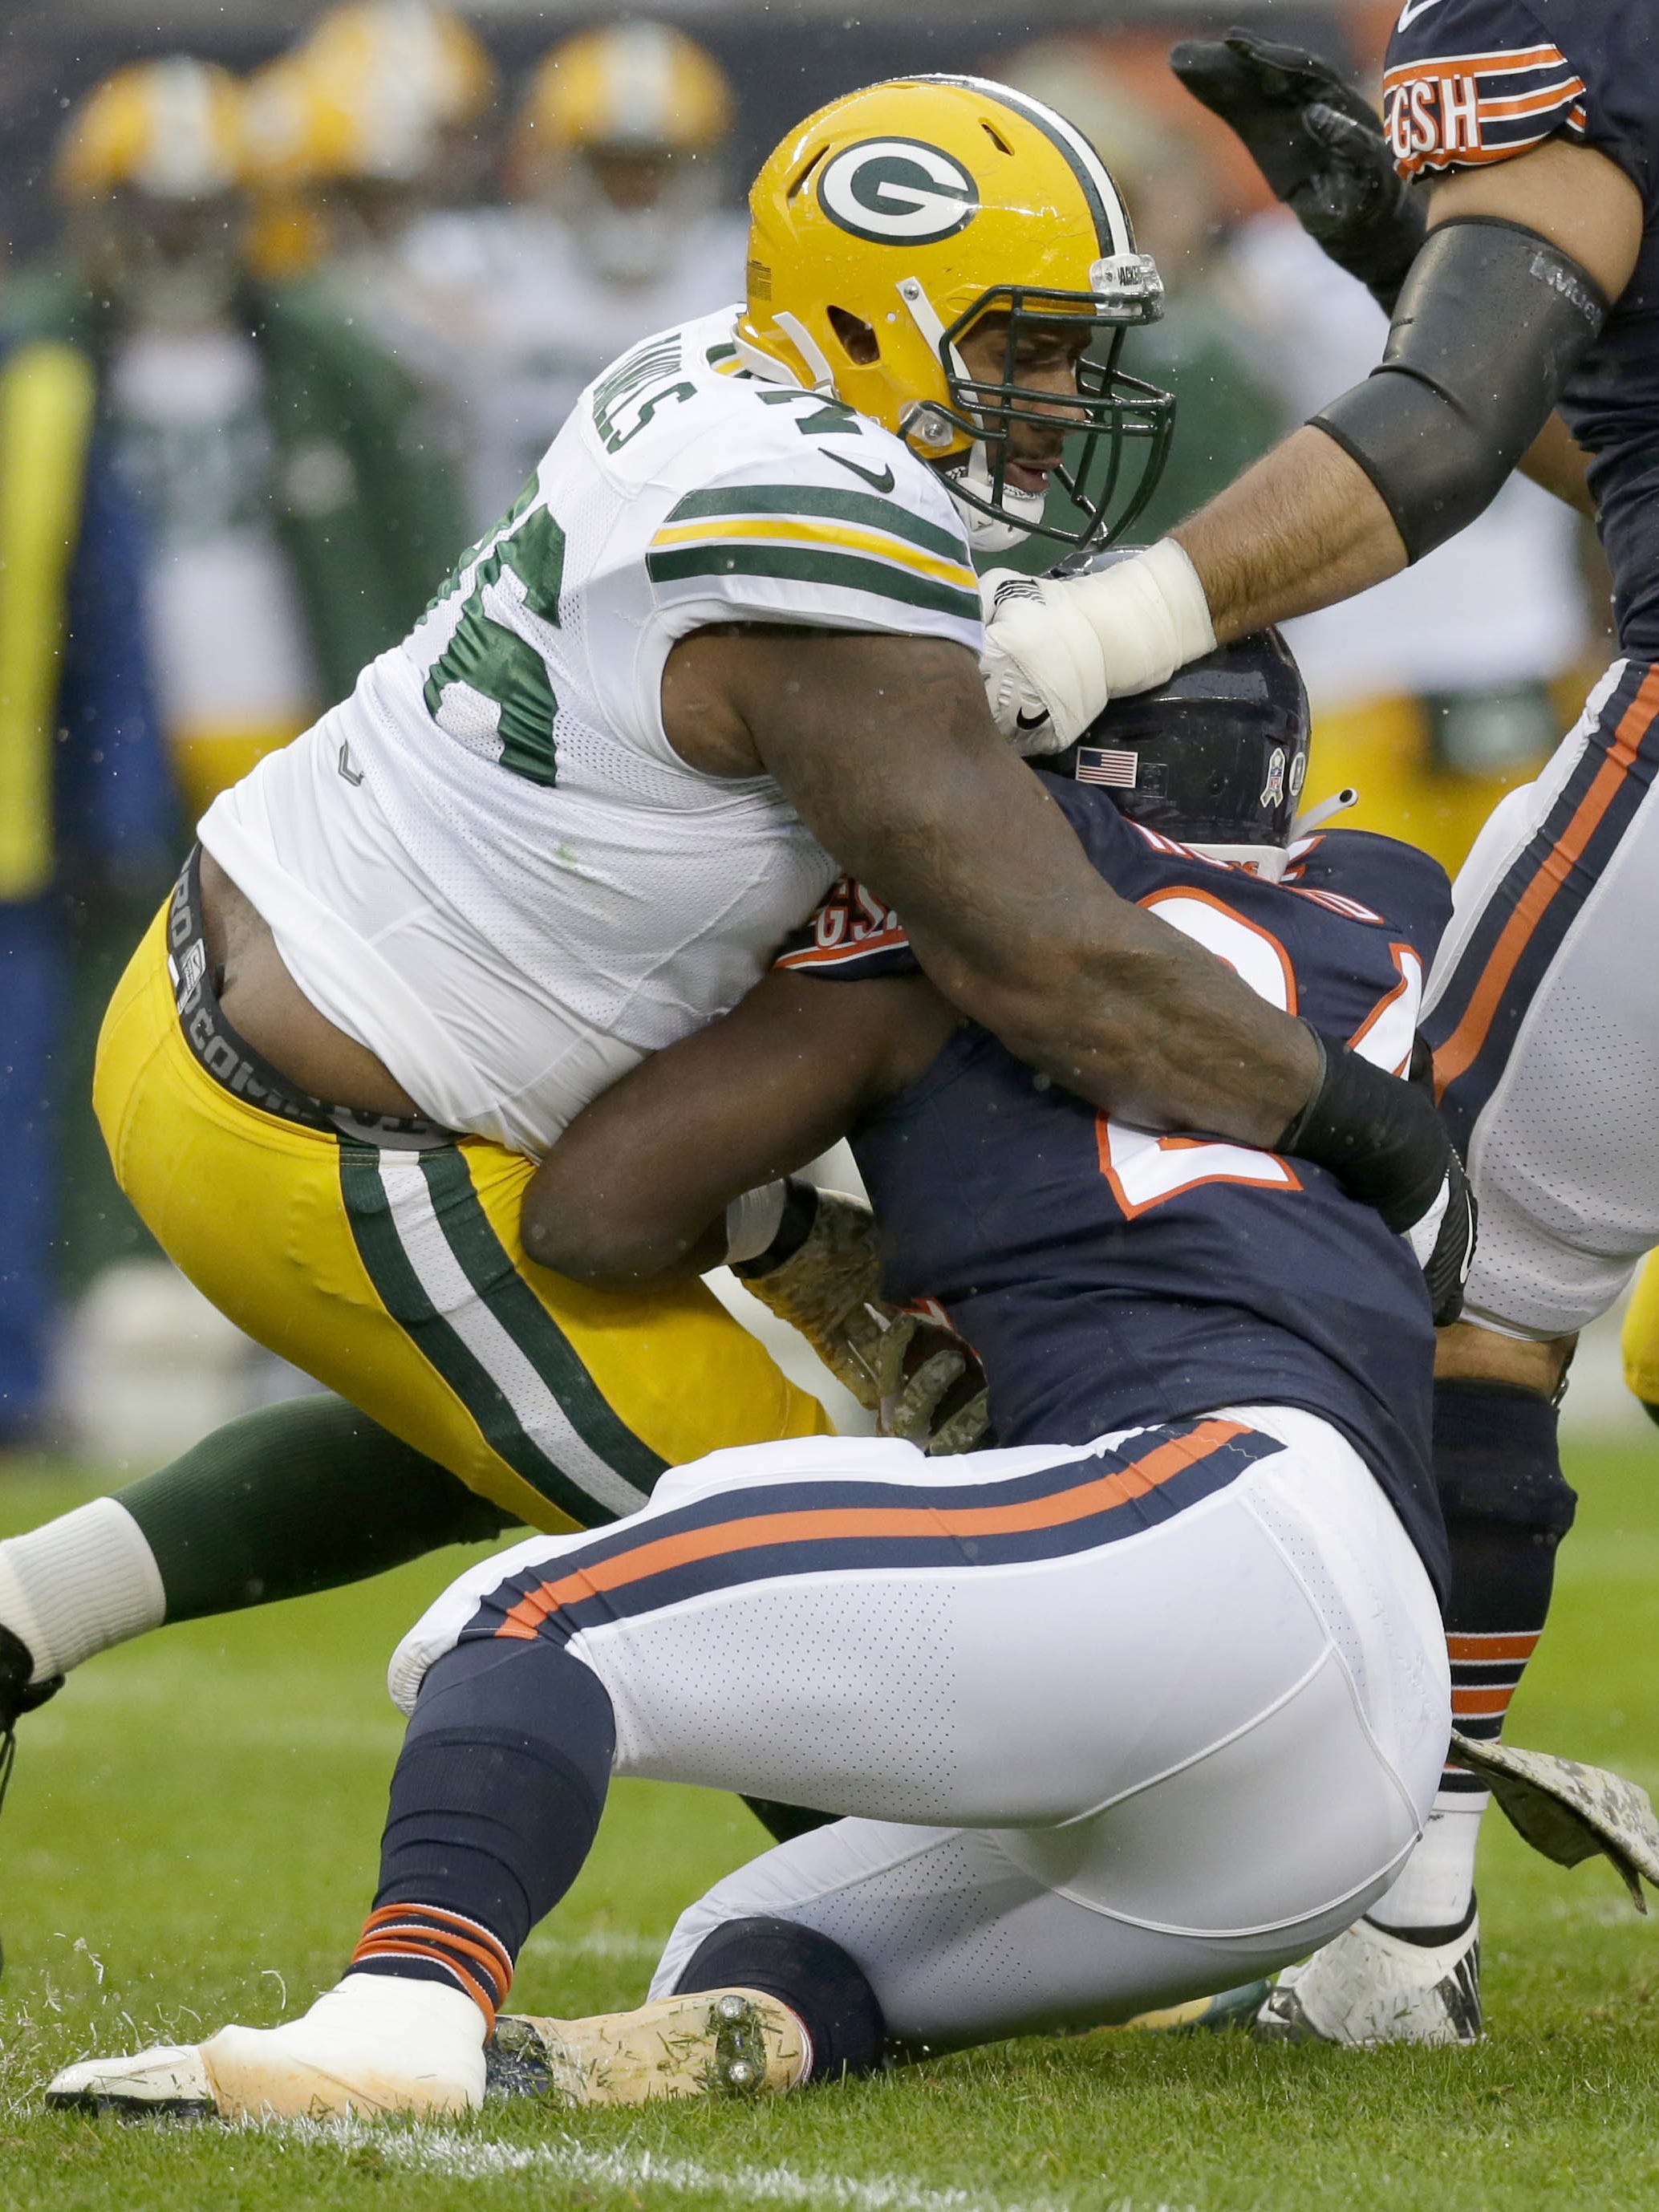 Green Bay Packers defensive end Mike Daniels (76) tackles Chicago Bears running back Jordan Howard (24) during the first quarter on Nov. 12, 2017, at Soldier Field in Chicago.